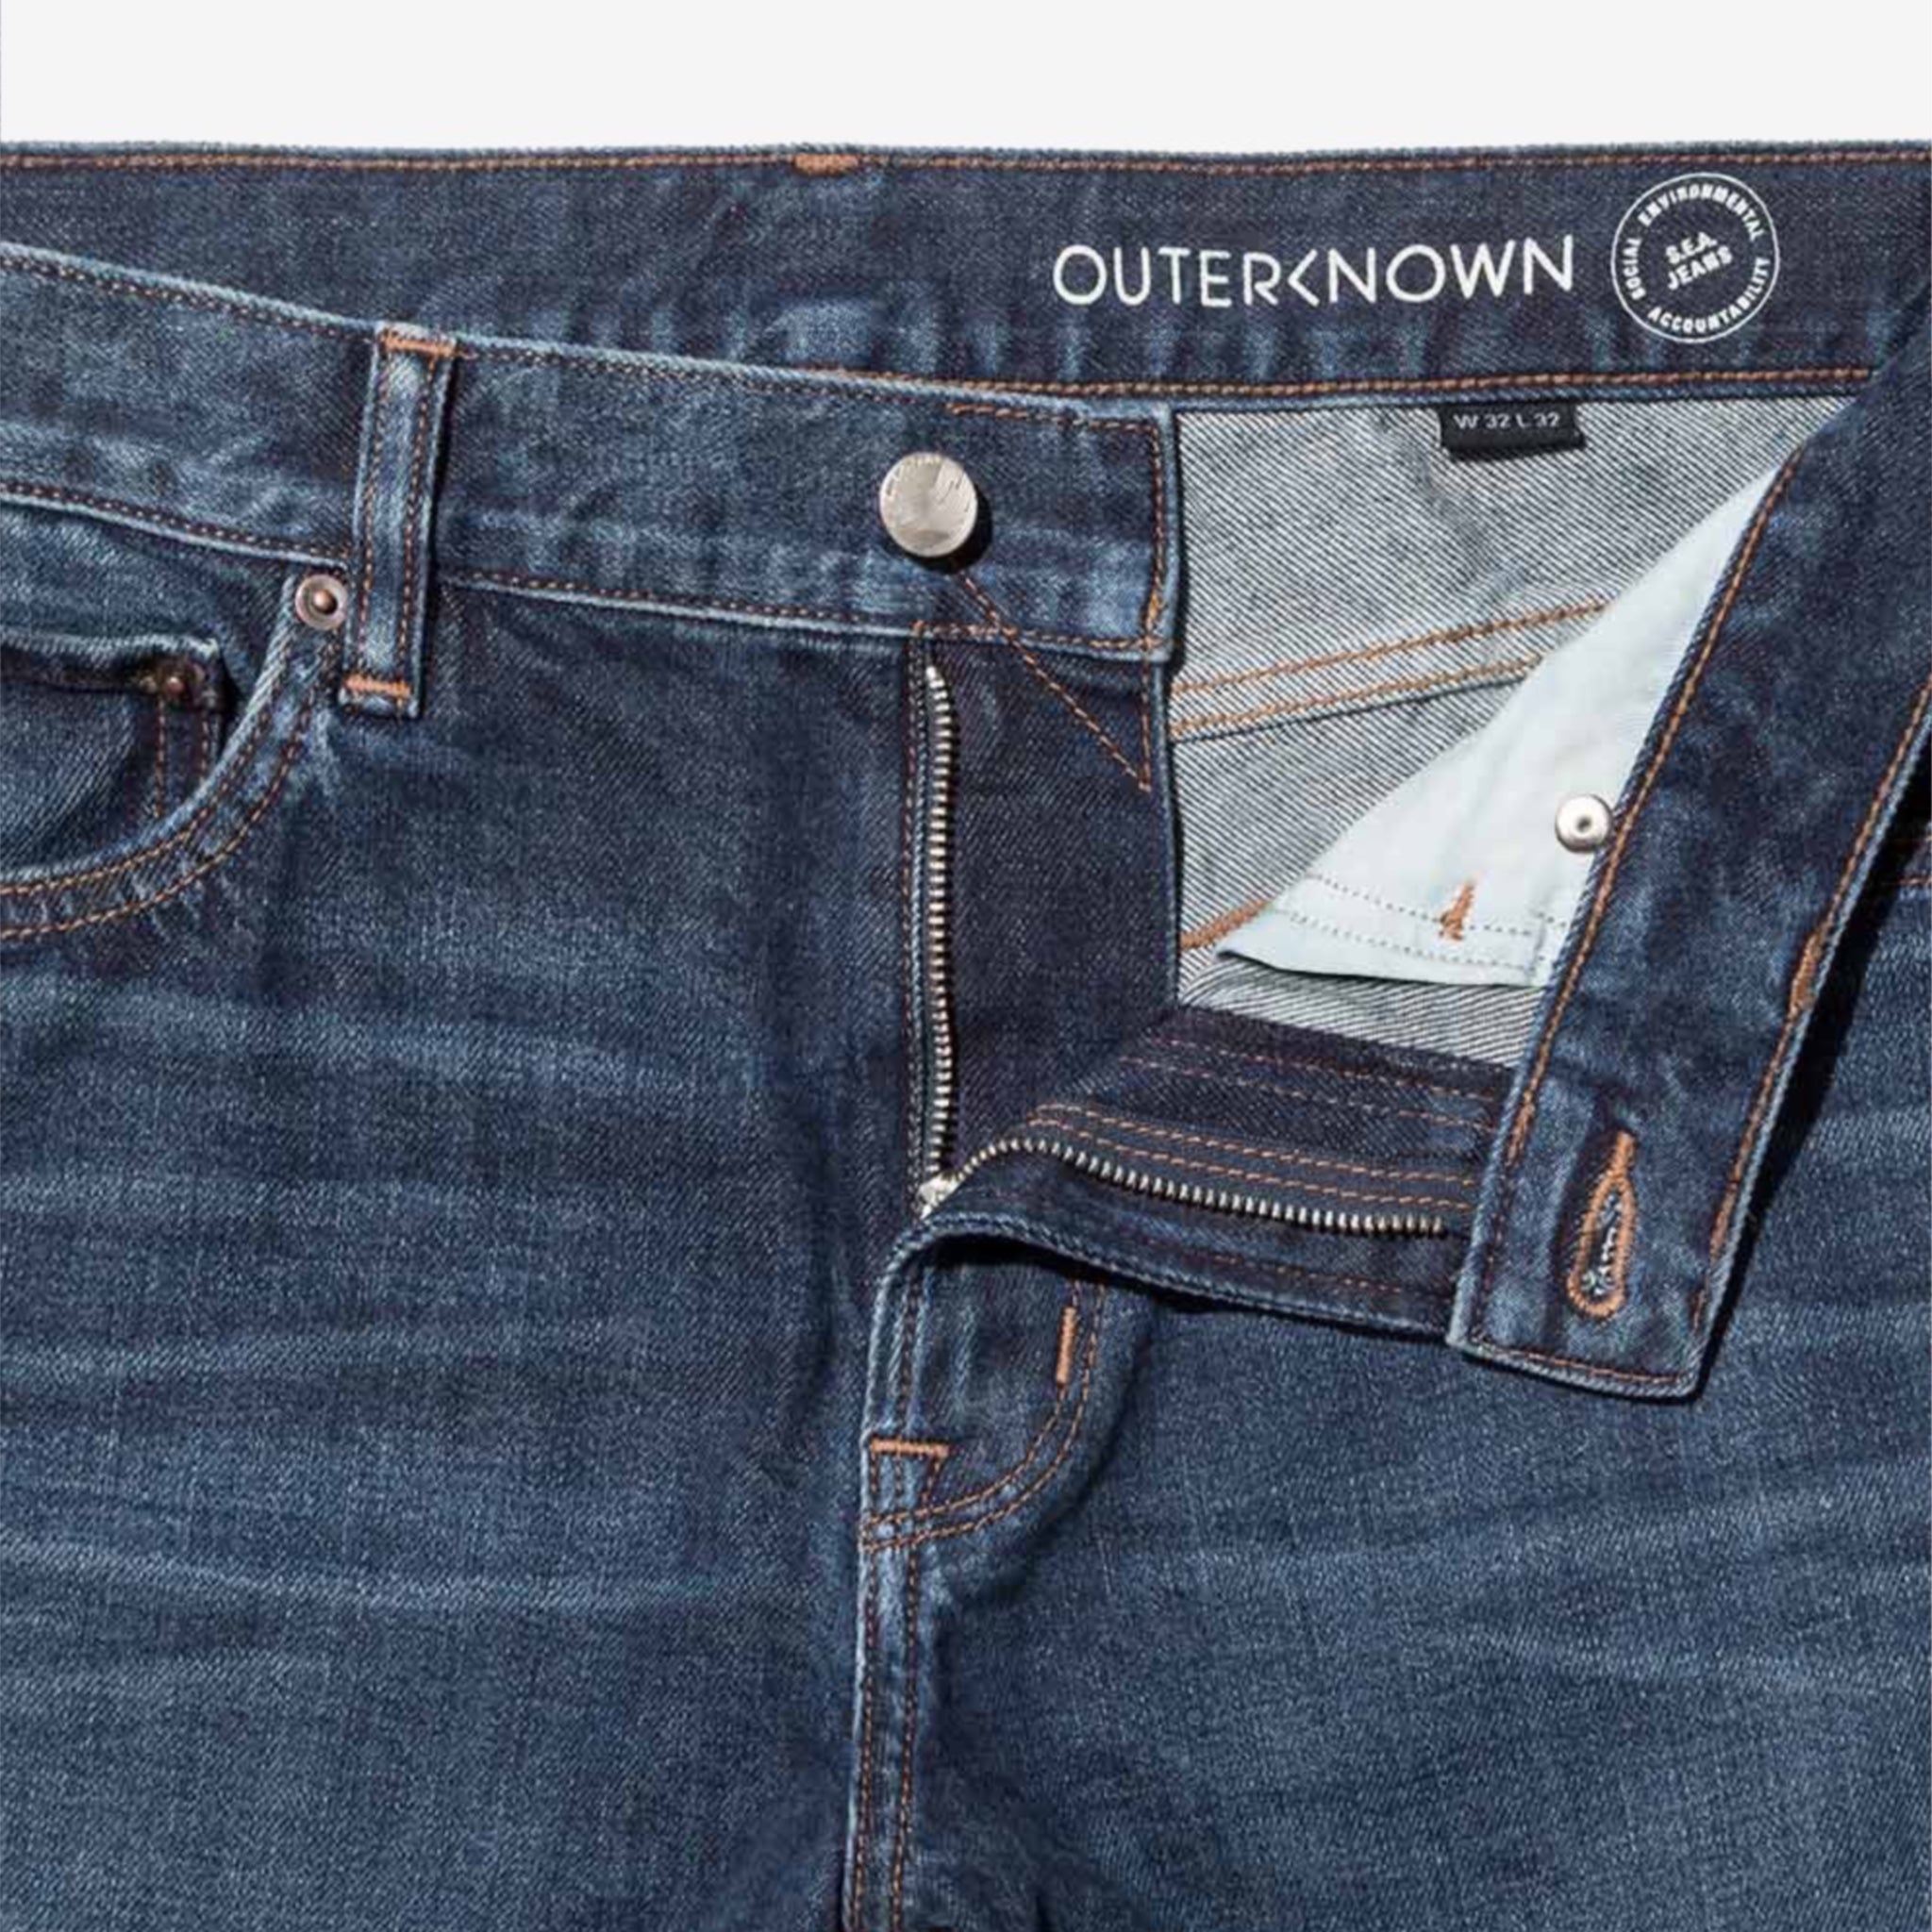 Outerknown Ambassador Slim Fit Jeans - Faded Indigo